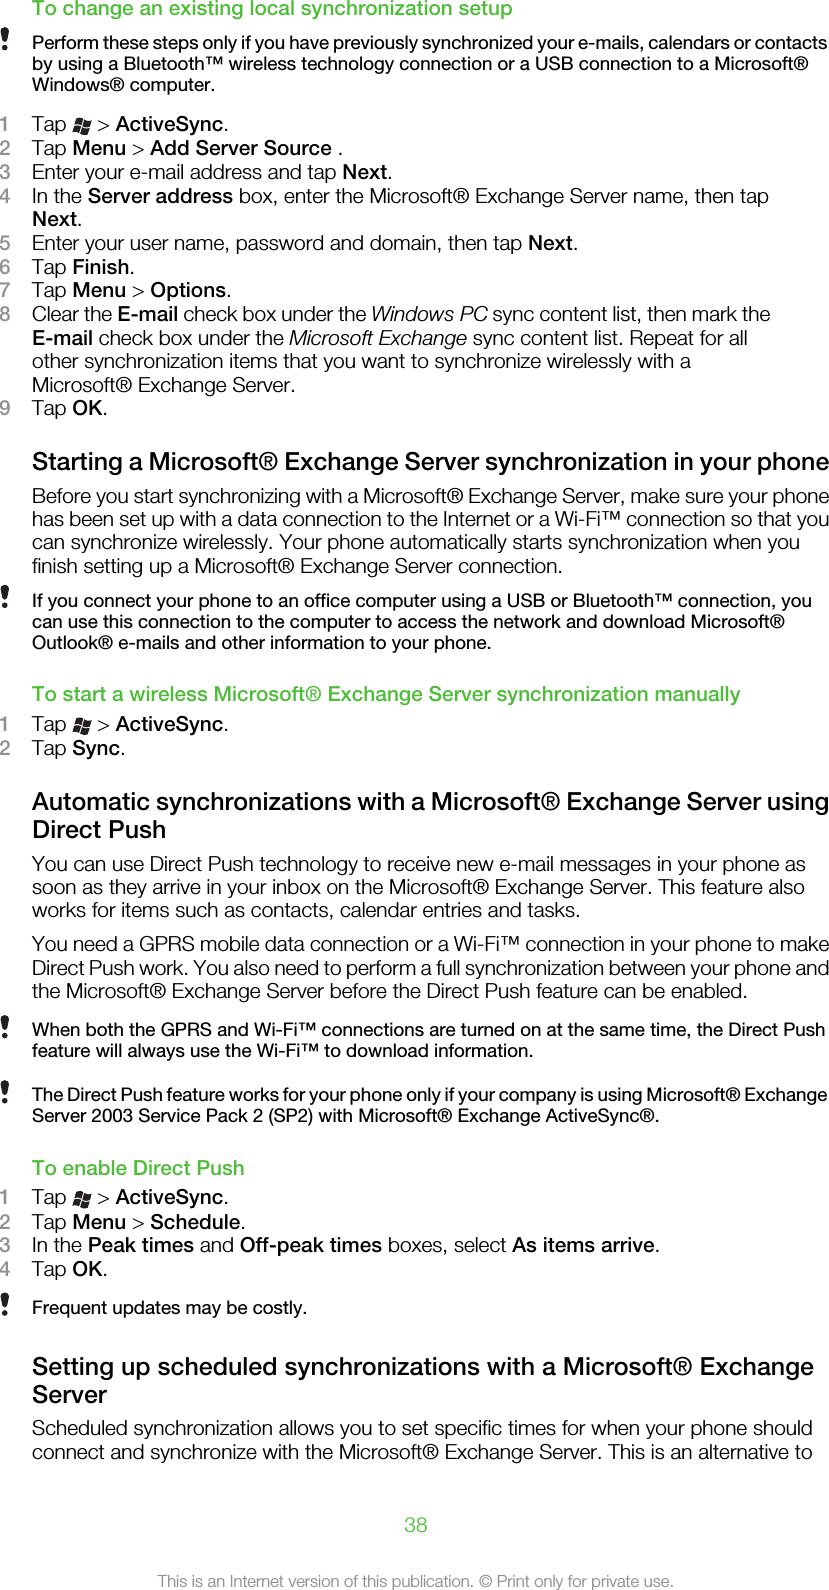 To change an existing local synchronization setupPerform these steps only if you have previously synchronized your e-mails, calendars or contactsby using a Bluetooth™ wireless technology connection or a USB connection to a Microsoft®Windows® computer.1Tap   &gt; ActiveSync.2Tap Menu &gt; Add Server Source .3Enter your e-mail address and tap Next.4In the Server address box, enter the Microsoft® Exchange Server name, then tapNext.5Enter your user name, password and domain, then tap Next.6Tap Finish.7Tap Menu &gt; Options.8Clear the E-mail check box under the Windows PC sync content list, then mark theE-mail check box under the Microsoft Exchange sync content list. Repeat for allother synchronization items that you want to synchronize wirelessly with aMicrosoft® Exchange Server.9Tap OK.Starting a Microsoft® Exchange Server synchronization in your phoneBefore you start synchronizing with a Microsoft® Exchange Server, make sure your phonehas been set up with a data connection to the Internet or a Wi-Fi™ connection so that youcan synchronize wirelessly. Your phone automatically starts synchronization when youfinish setting up a Microsoft® Exchange Server connection.If you connect your phone to an office computer using a USB or Bluetooth™ connection, youcan use this connection to the computer to access the network and download Microsoft®Outlook® e-mails and other information to your phone.To start a wireless Microsoft® Exchange Server synchronization manually1Tap   &gt; ActiveSync.2Tap Sync.Automatic synchronizations with a Microsoft® Exchange Server usingDirect PushYou can use Direct Push technology to receive new e-mail messages in your phone assoon as they arrive in your inbox on the Microsoft® Exchange Server. This feature alsoworks for items such as contacts, calendar entries and tasks.You need a GPRS mobile data connection or a Wi-Fi™ connection in your phone to makeDirect Push work. You also need to perform a full synchronization between your phone andthe Microsoft® Exchange Server before the Direct Push feature can be enabled.When both the GPRS and Wi-Fi™ connections are turned on at the same time, the Direct Pushfeature will always use the Wi-Fi™ to download information.The Direct Push feature works for your phone only if your company is using Microsoft® ExchangeServer 2003 Service Pack 2 (SP2) with Microsoft® Exchange ActiveSync®.To enable Direct Push1Tap   &gt; ActiveSync.2Tap Menu &gt; Schedule.3In the Peak times and Off-peak times boxes, select As items arrive.4Tap OK.Frequent updates may be costly.Setting up scheduled synchronizations with a Microsoft® ExchangeServerScheduled synchronization allows you to set specific times for when your phone shouldconnect and synchronize with the Microsoft® Exchange Server. This is an alternative to38This is an Internet version of this publication. © Print only for private use.